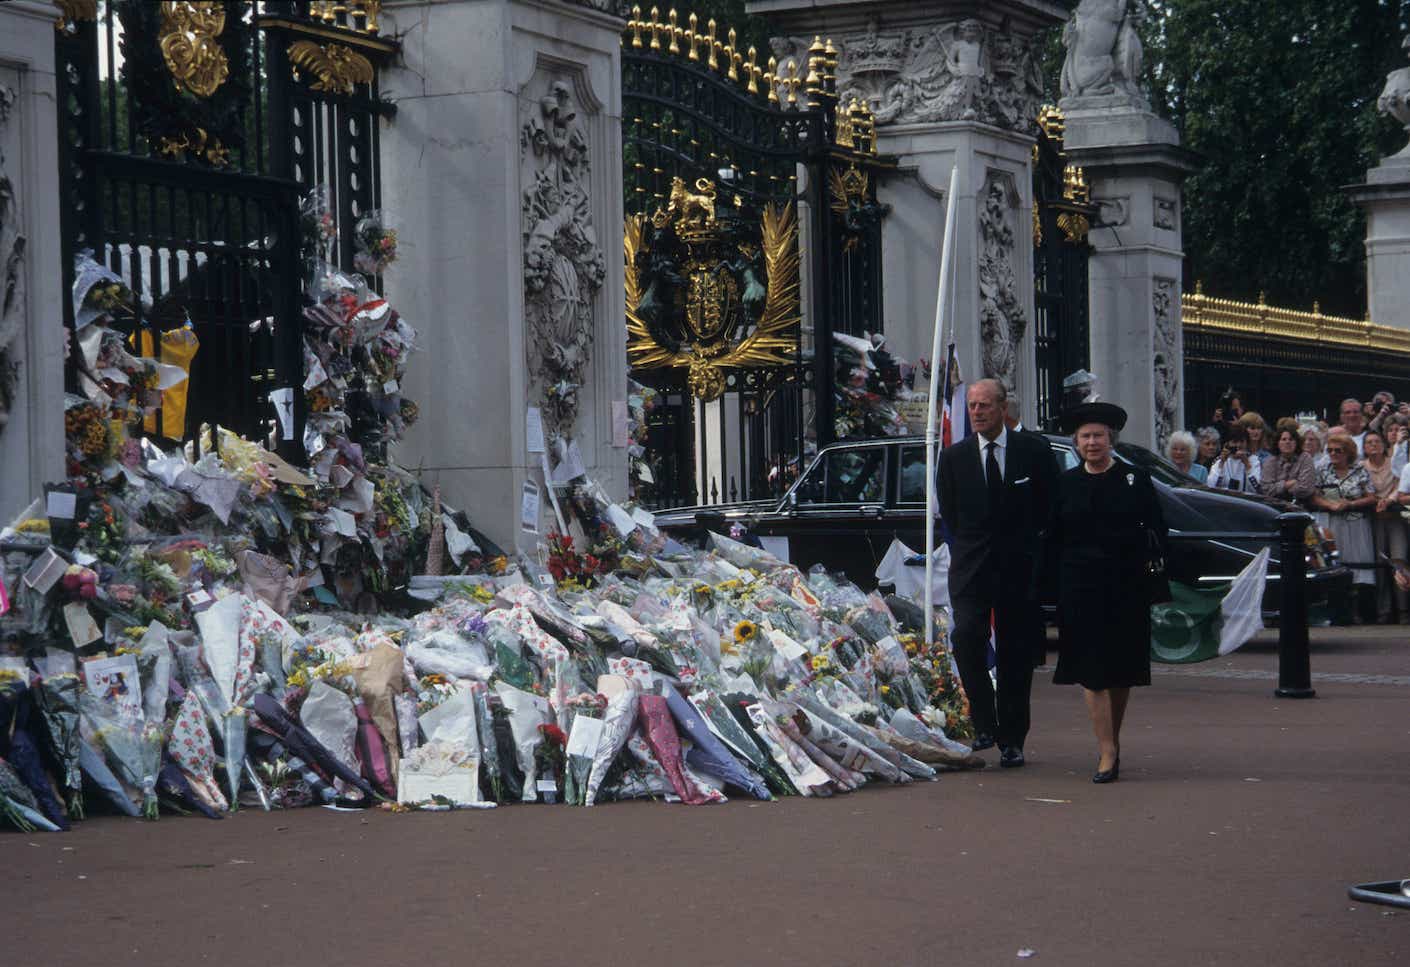 Queen Elizabeth II and Prince Philip walk past floral tributes to the late Princess Diana before the public funeral in 1997.